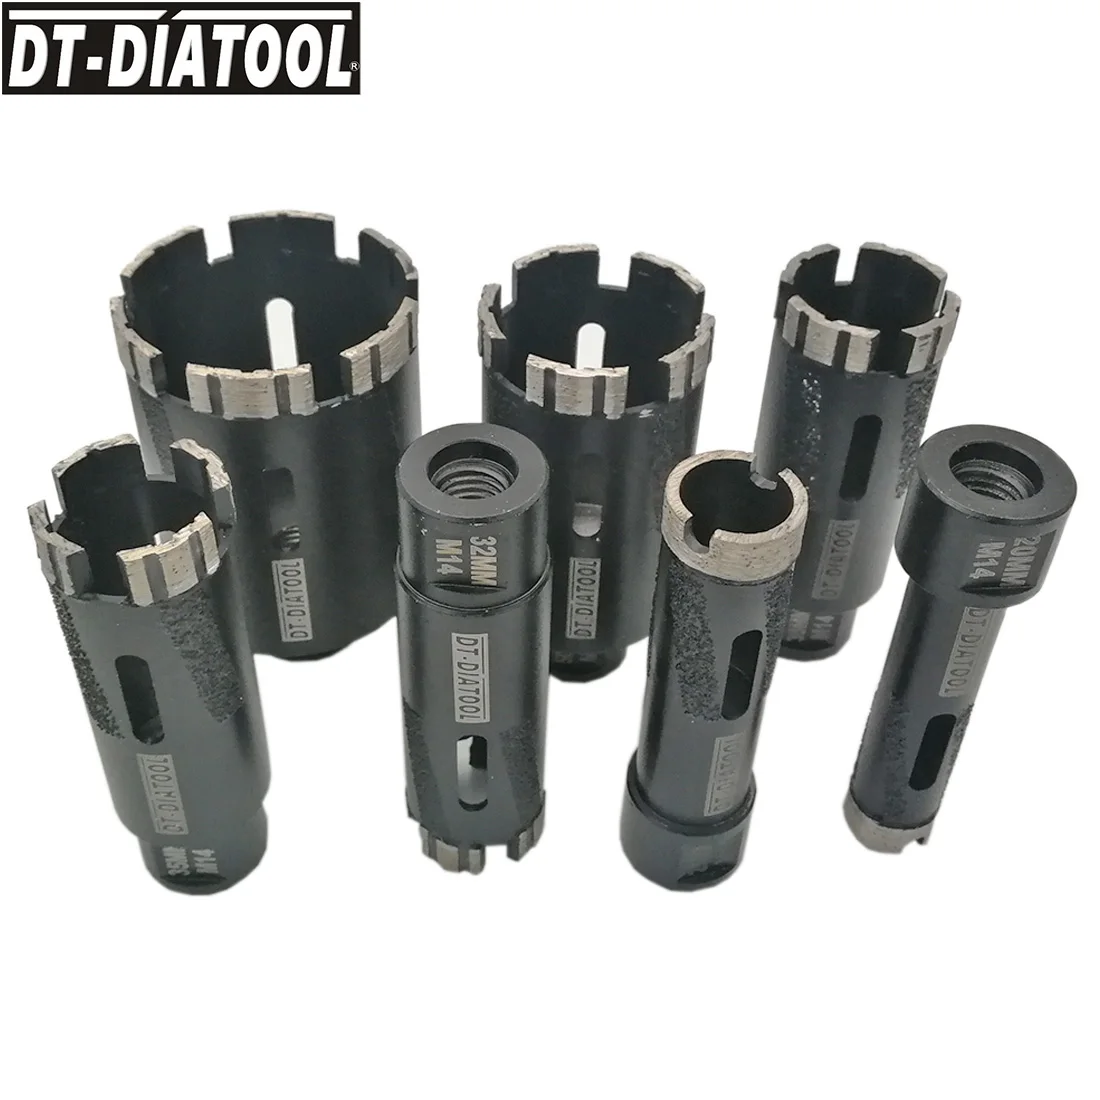 DT-DIATOOL 1pc M14 Thread Laser Welded Dry Diamond Hole Saw Dry Drilling Core Bits for Drilling Hard Granite Marble Stone